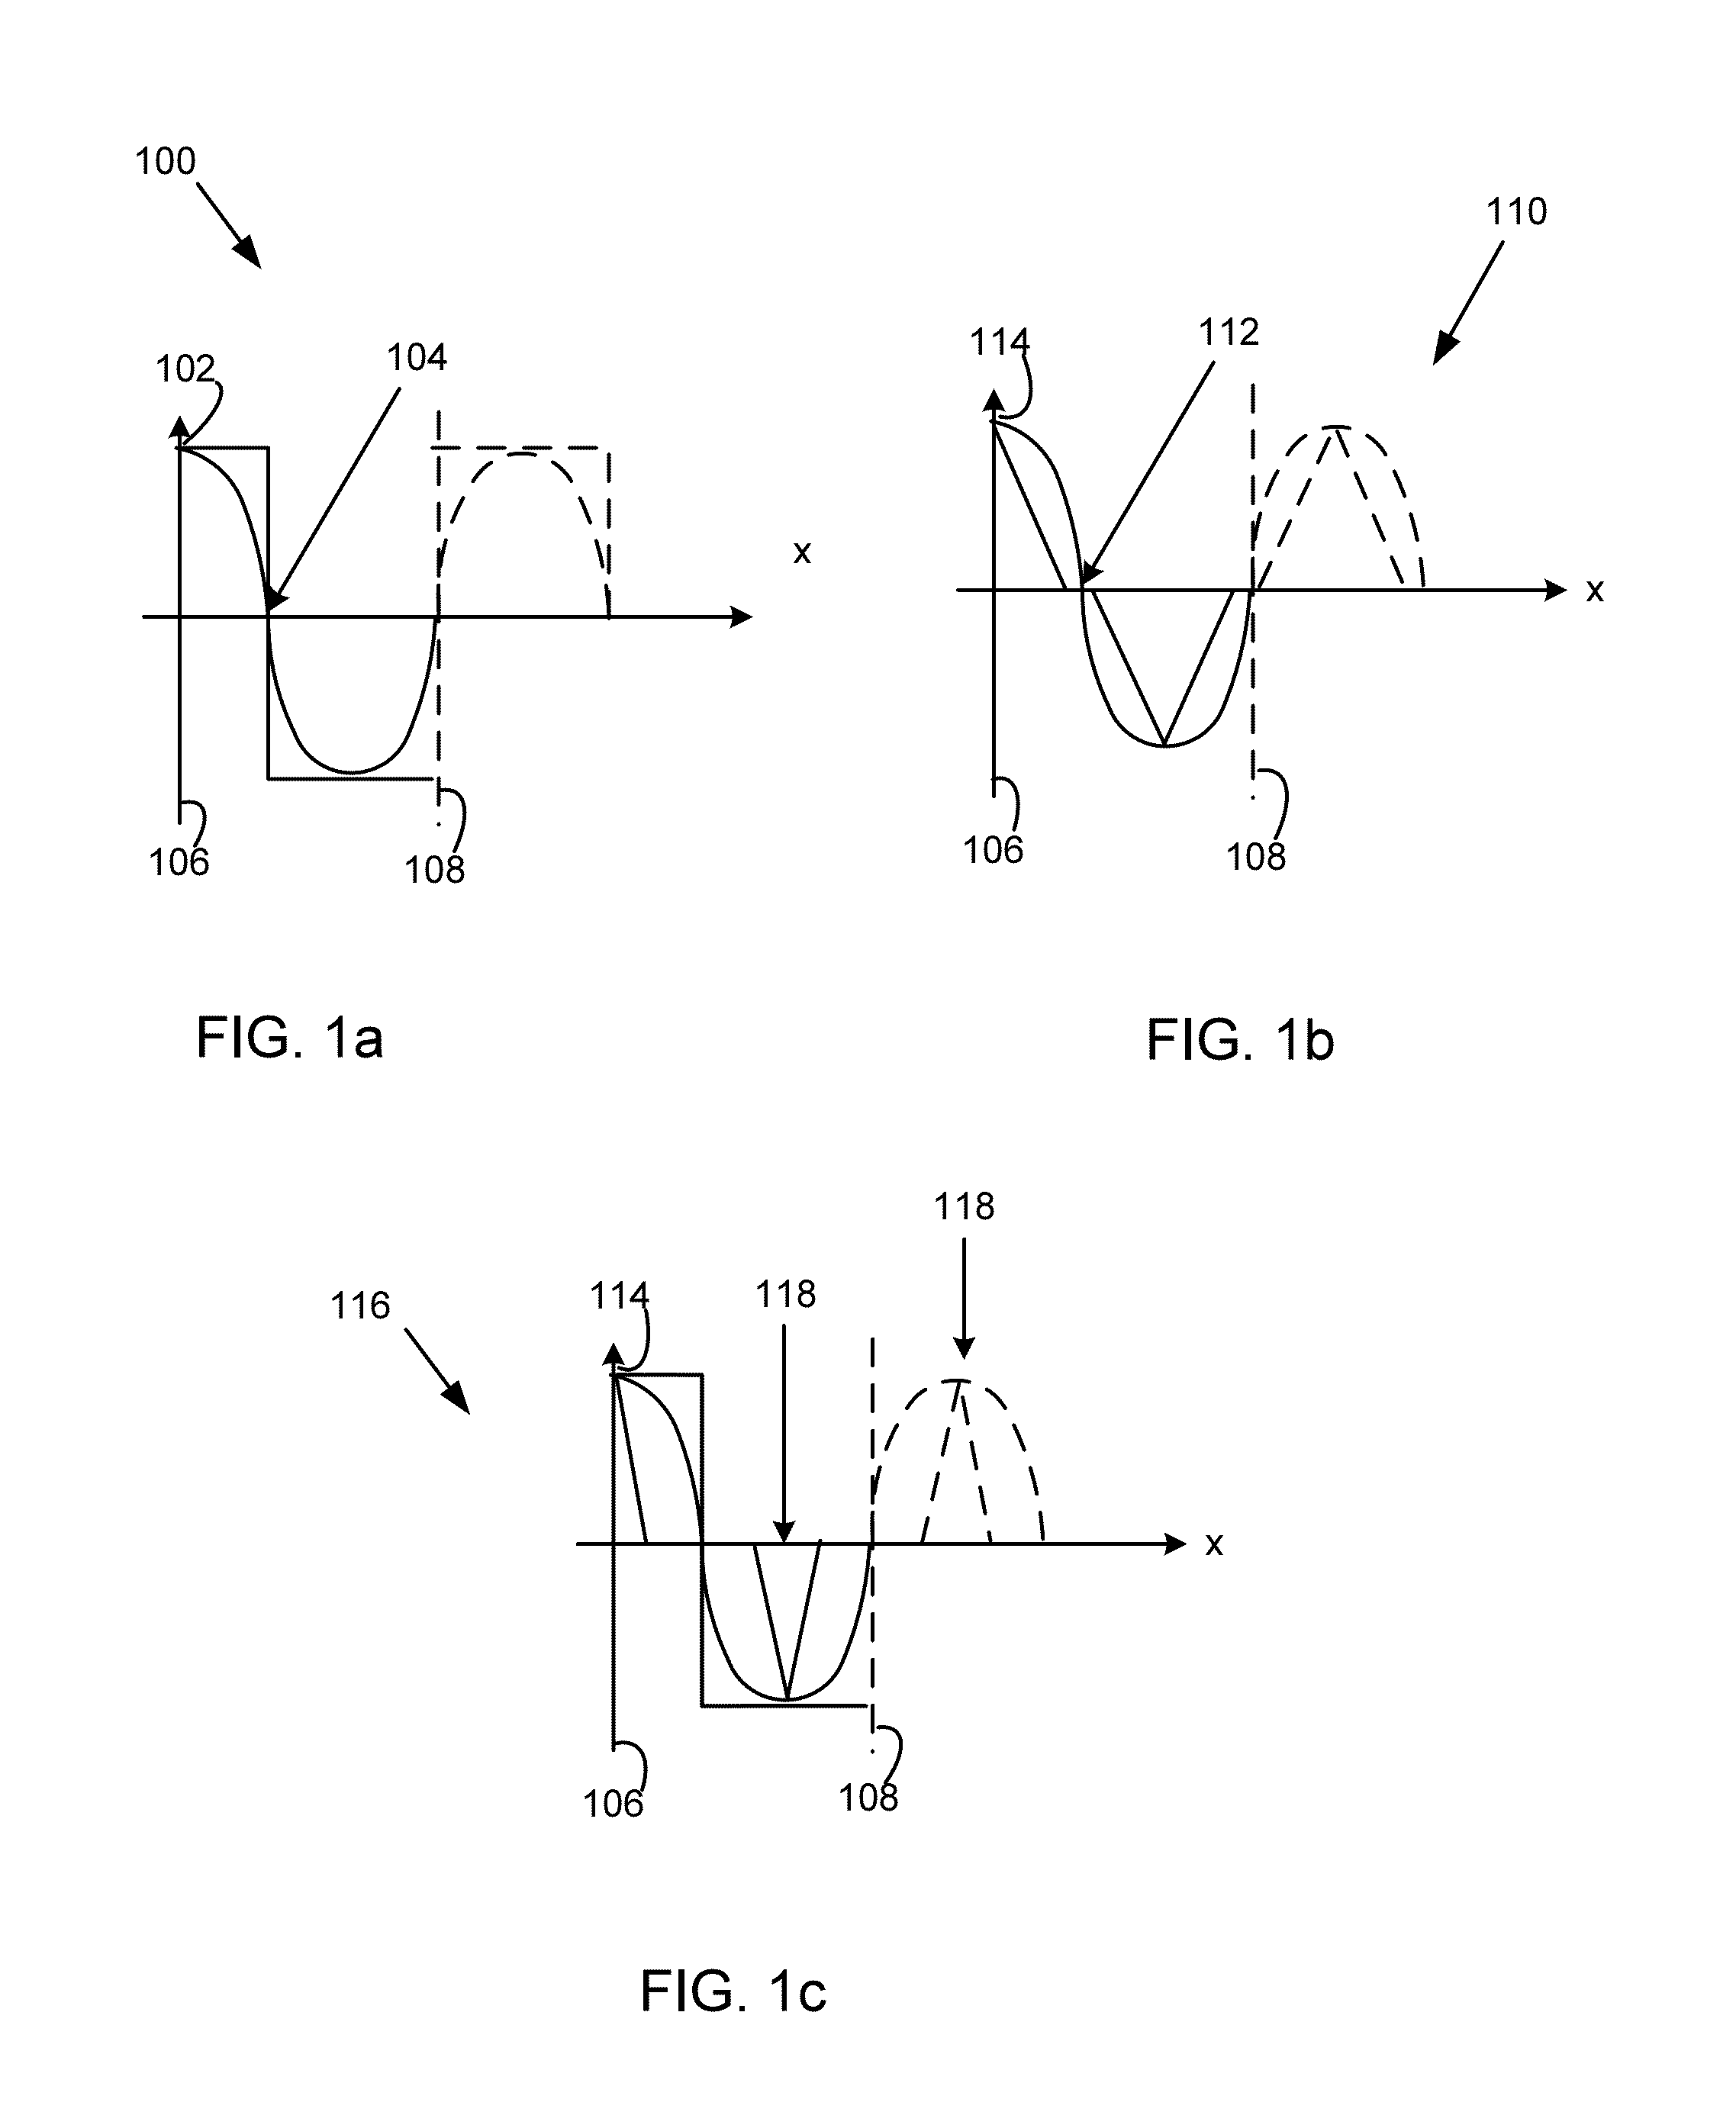 System and method for harmonic modulation of standing wavefields for spatial focusing, manipulation, and patterning